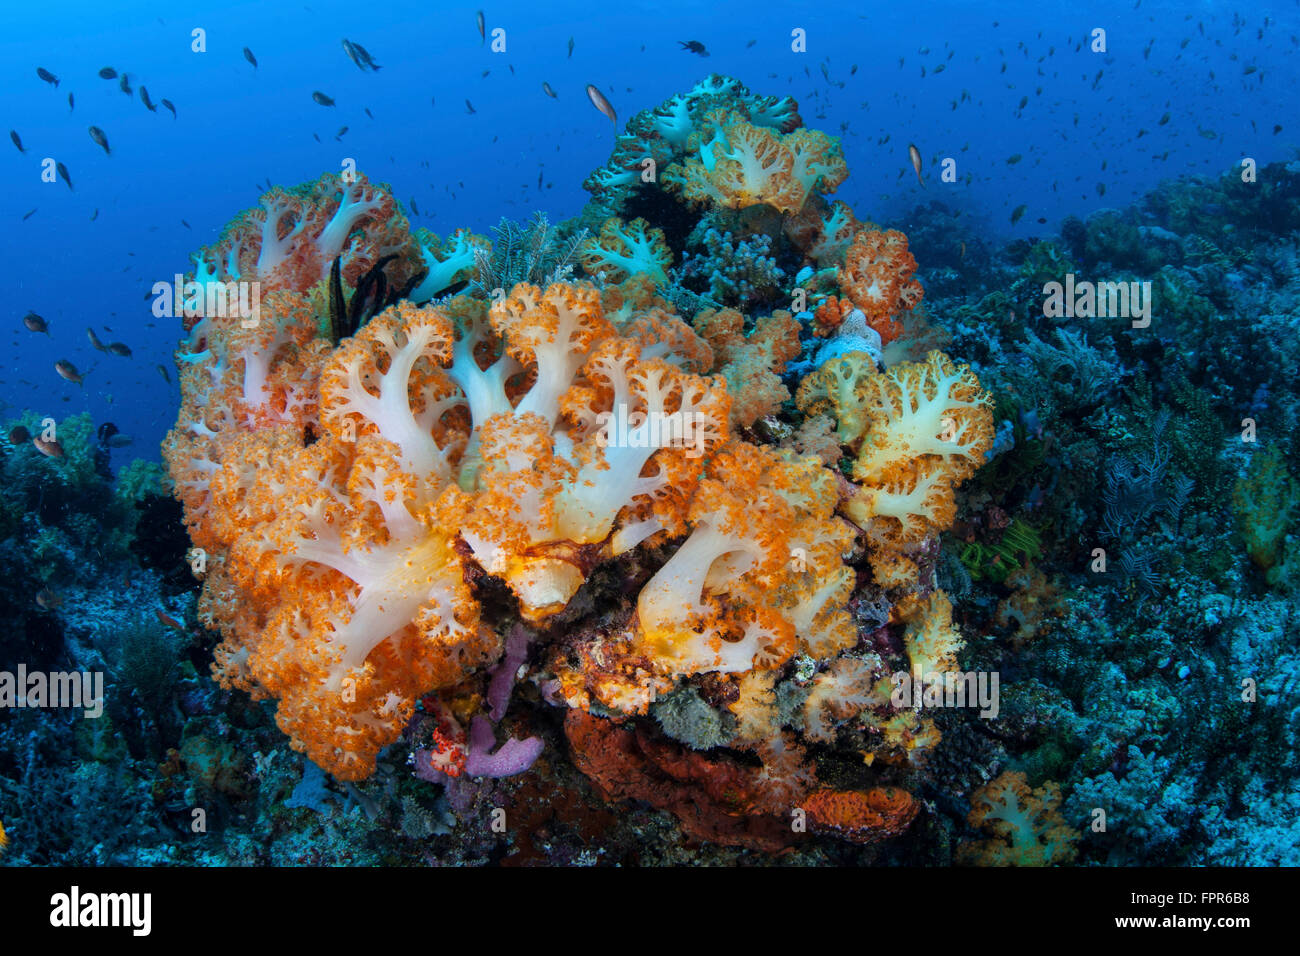 A beautiful cluster of soft coral colonies grows on a healthy coral ...